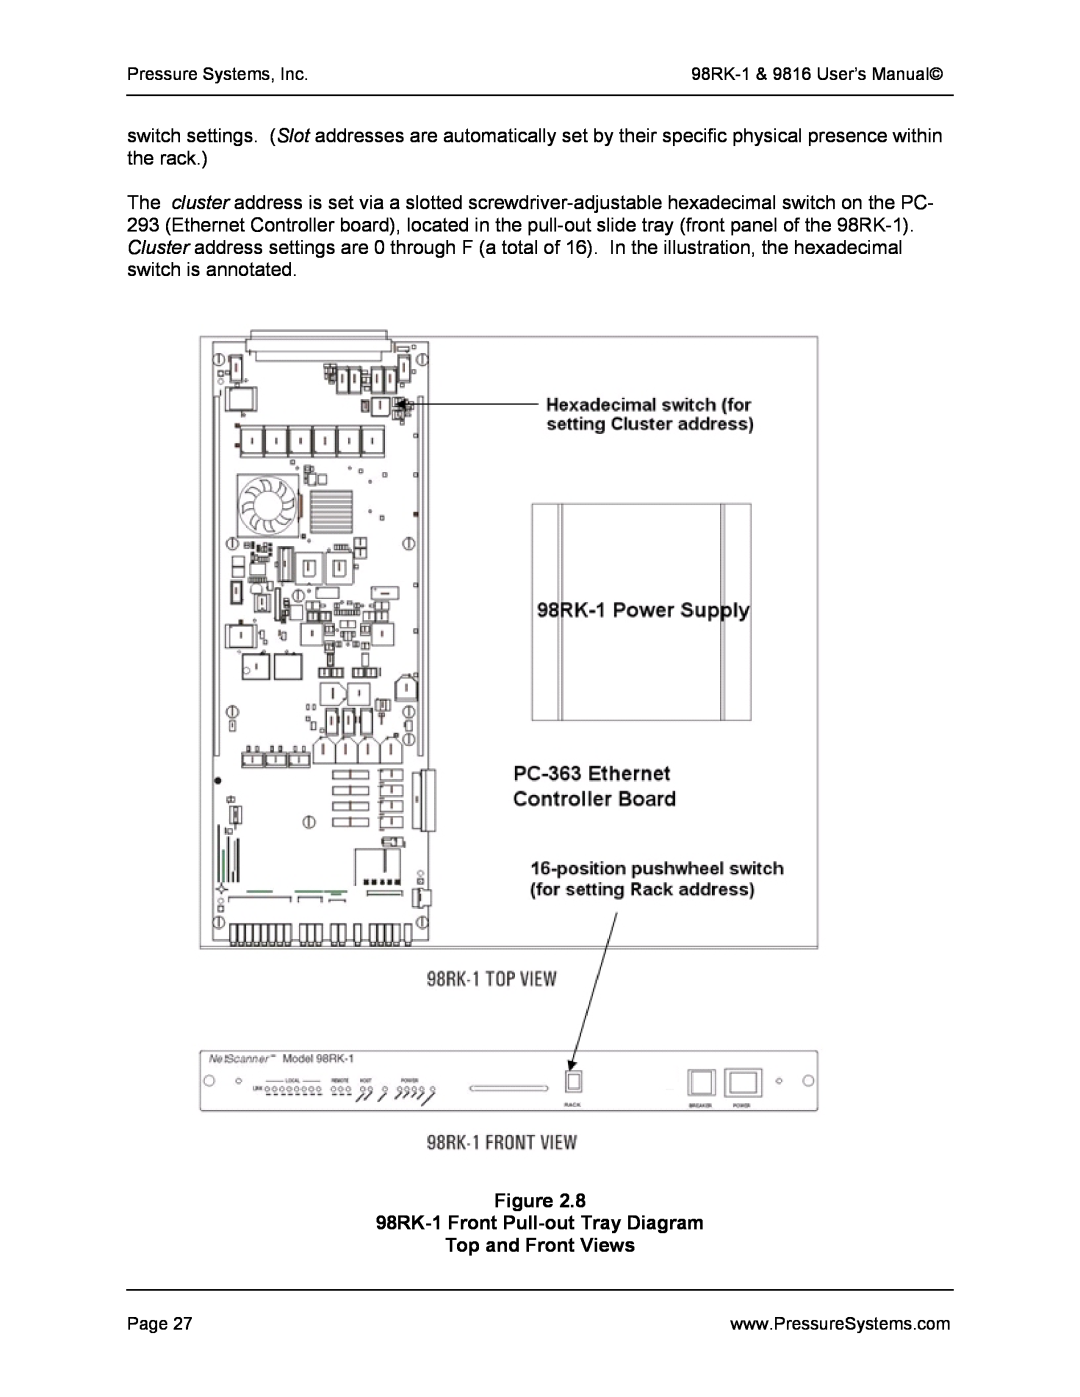 Pressure Systems user manual 98RK-1 Front Pull-out Tray Diagram Top and Front Views 